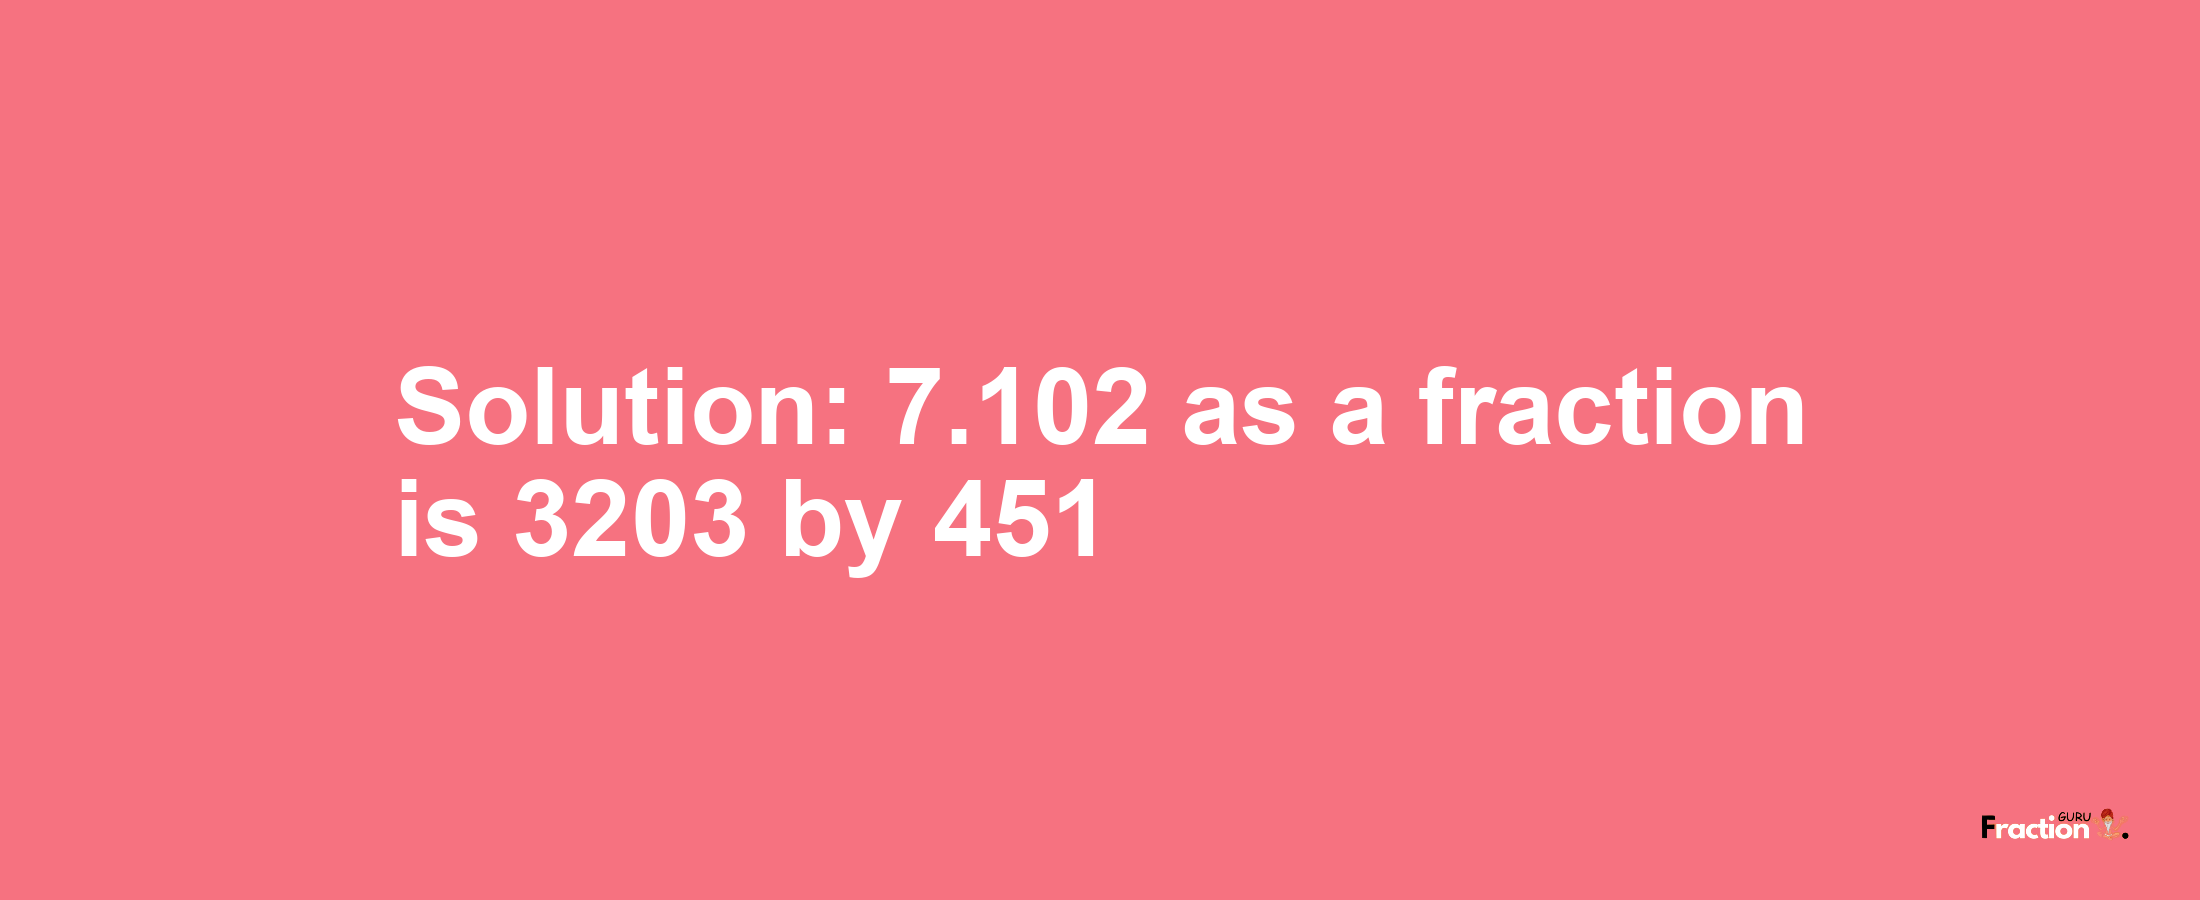 Solution:7.102 as a fraction is 3203/451